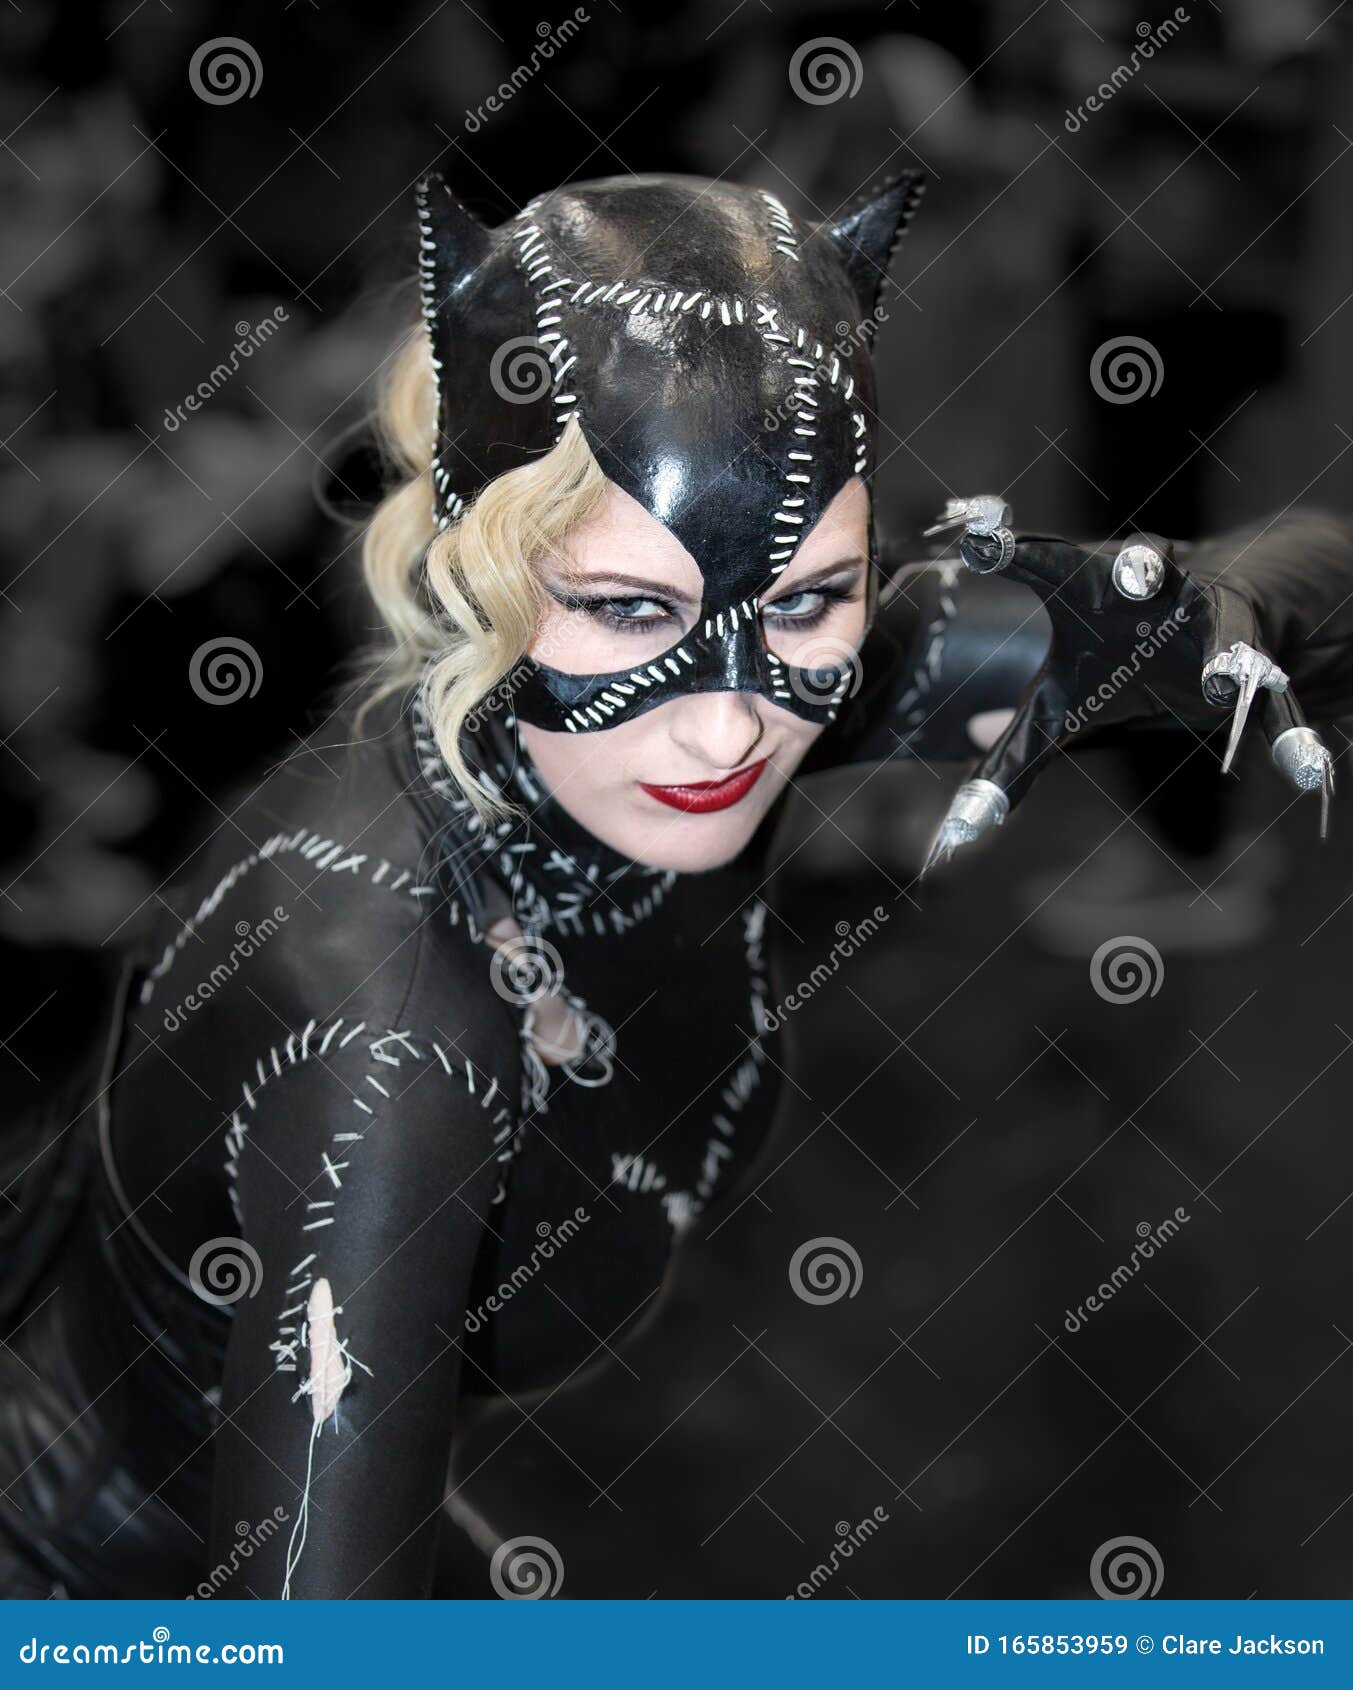 Hot catwoman 25 Sexiest